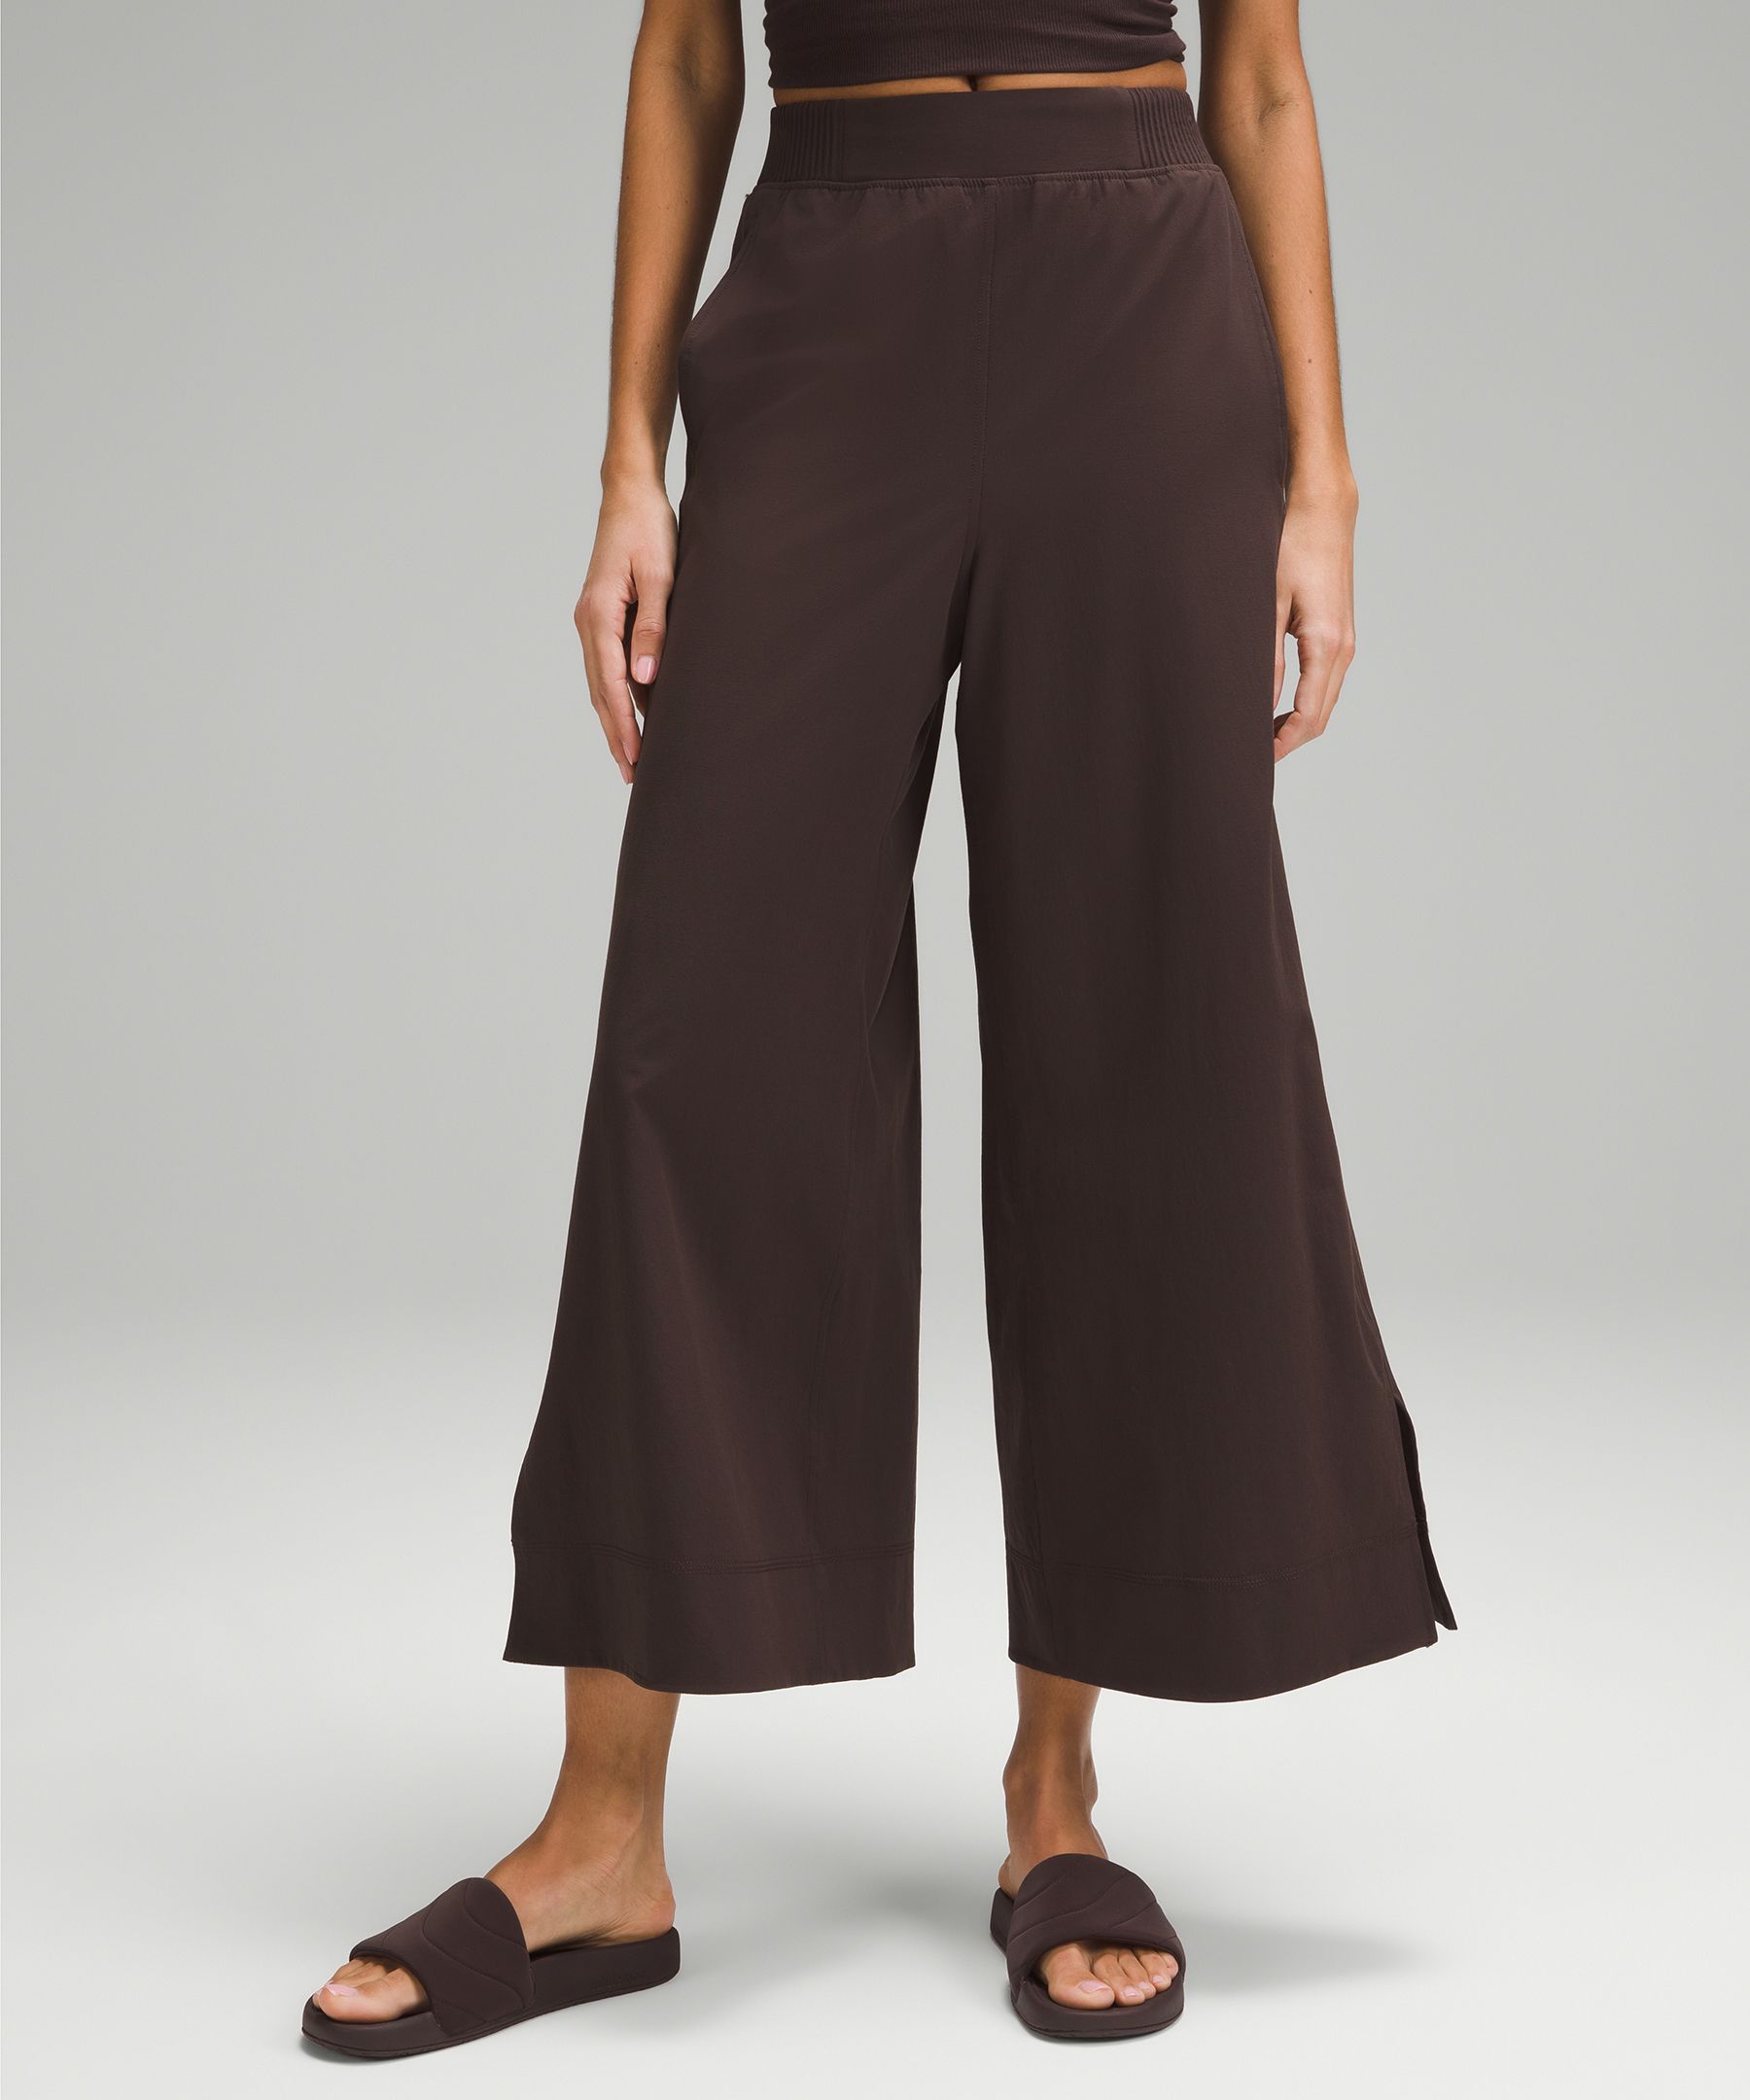 Lululemon Stretch Woven High-Rise Wide-Leg Cropped Pant